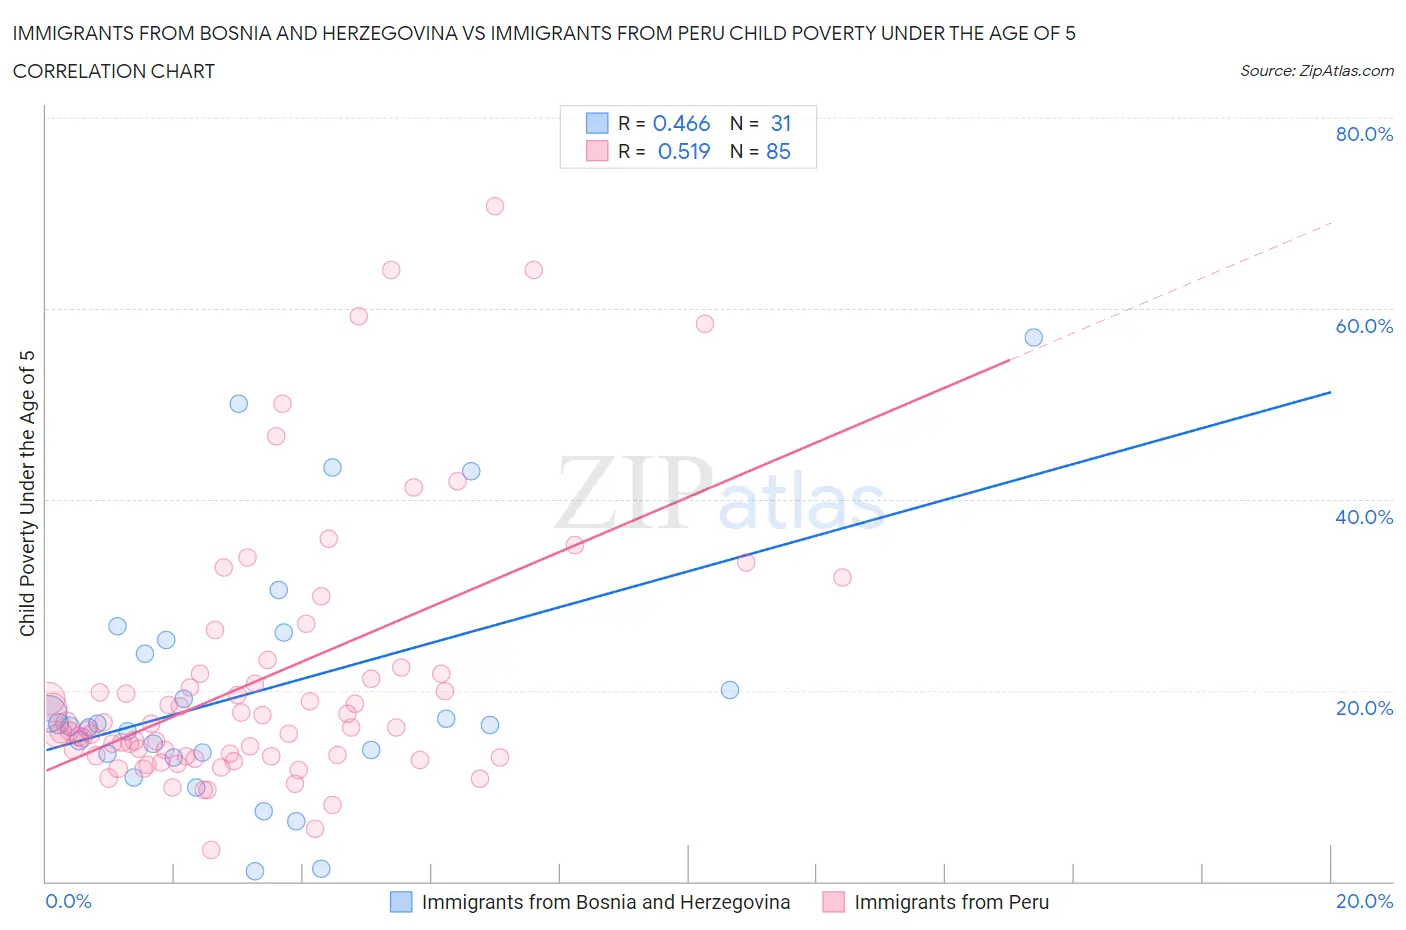 Immigrants from Bosnia and Herzegovina vs Immigrants from Peru Child Poverty Under the Age of 5